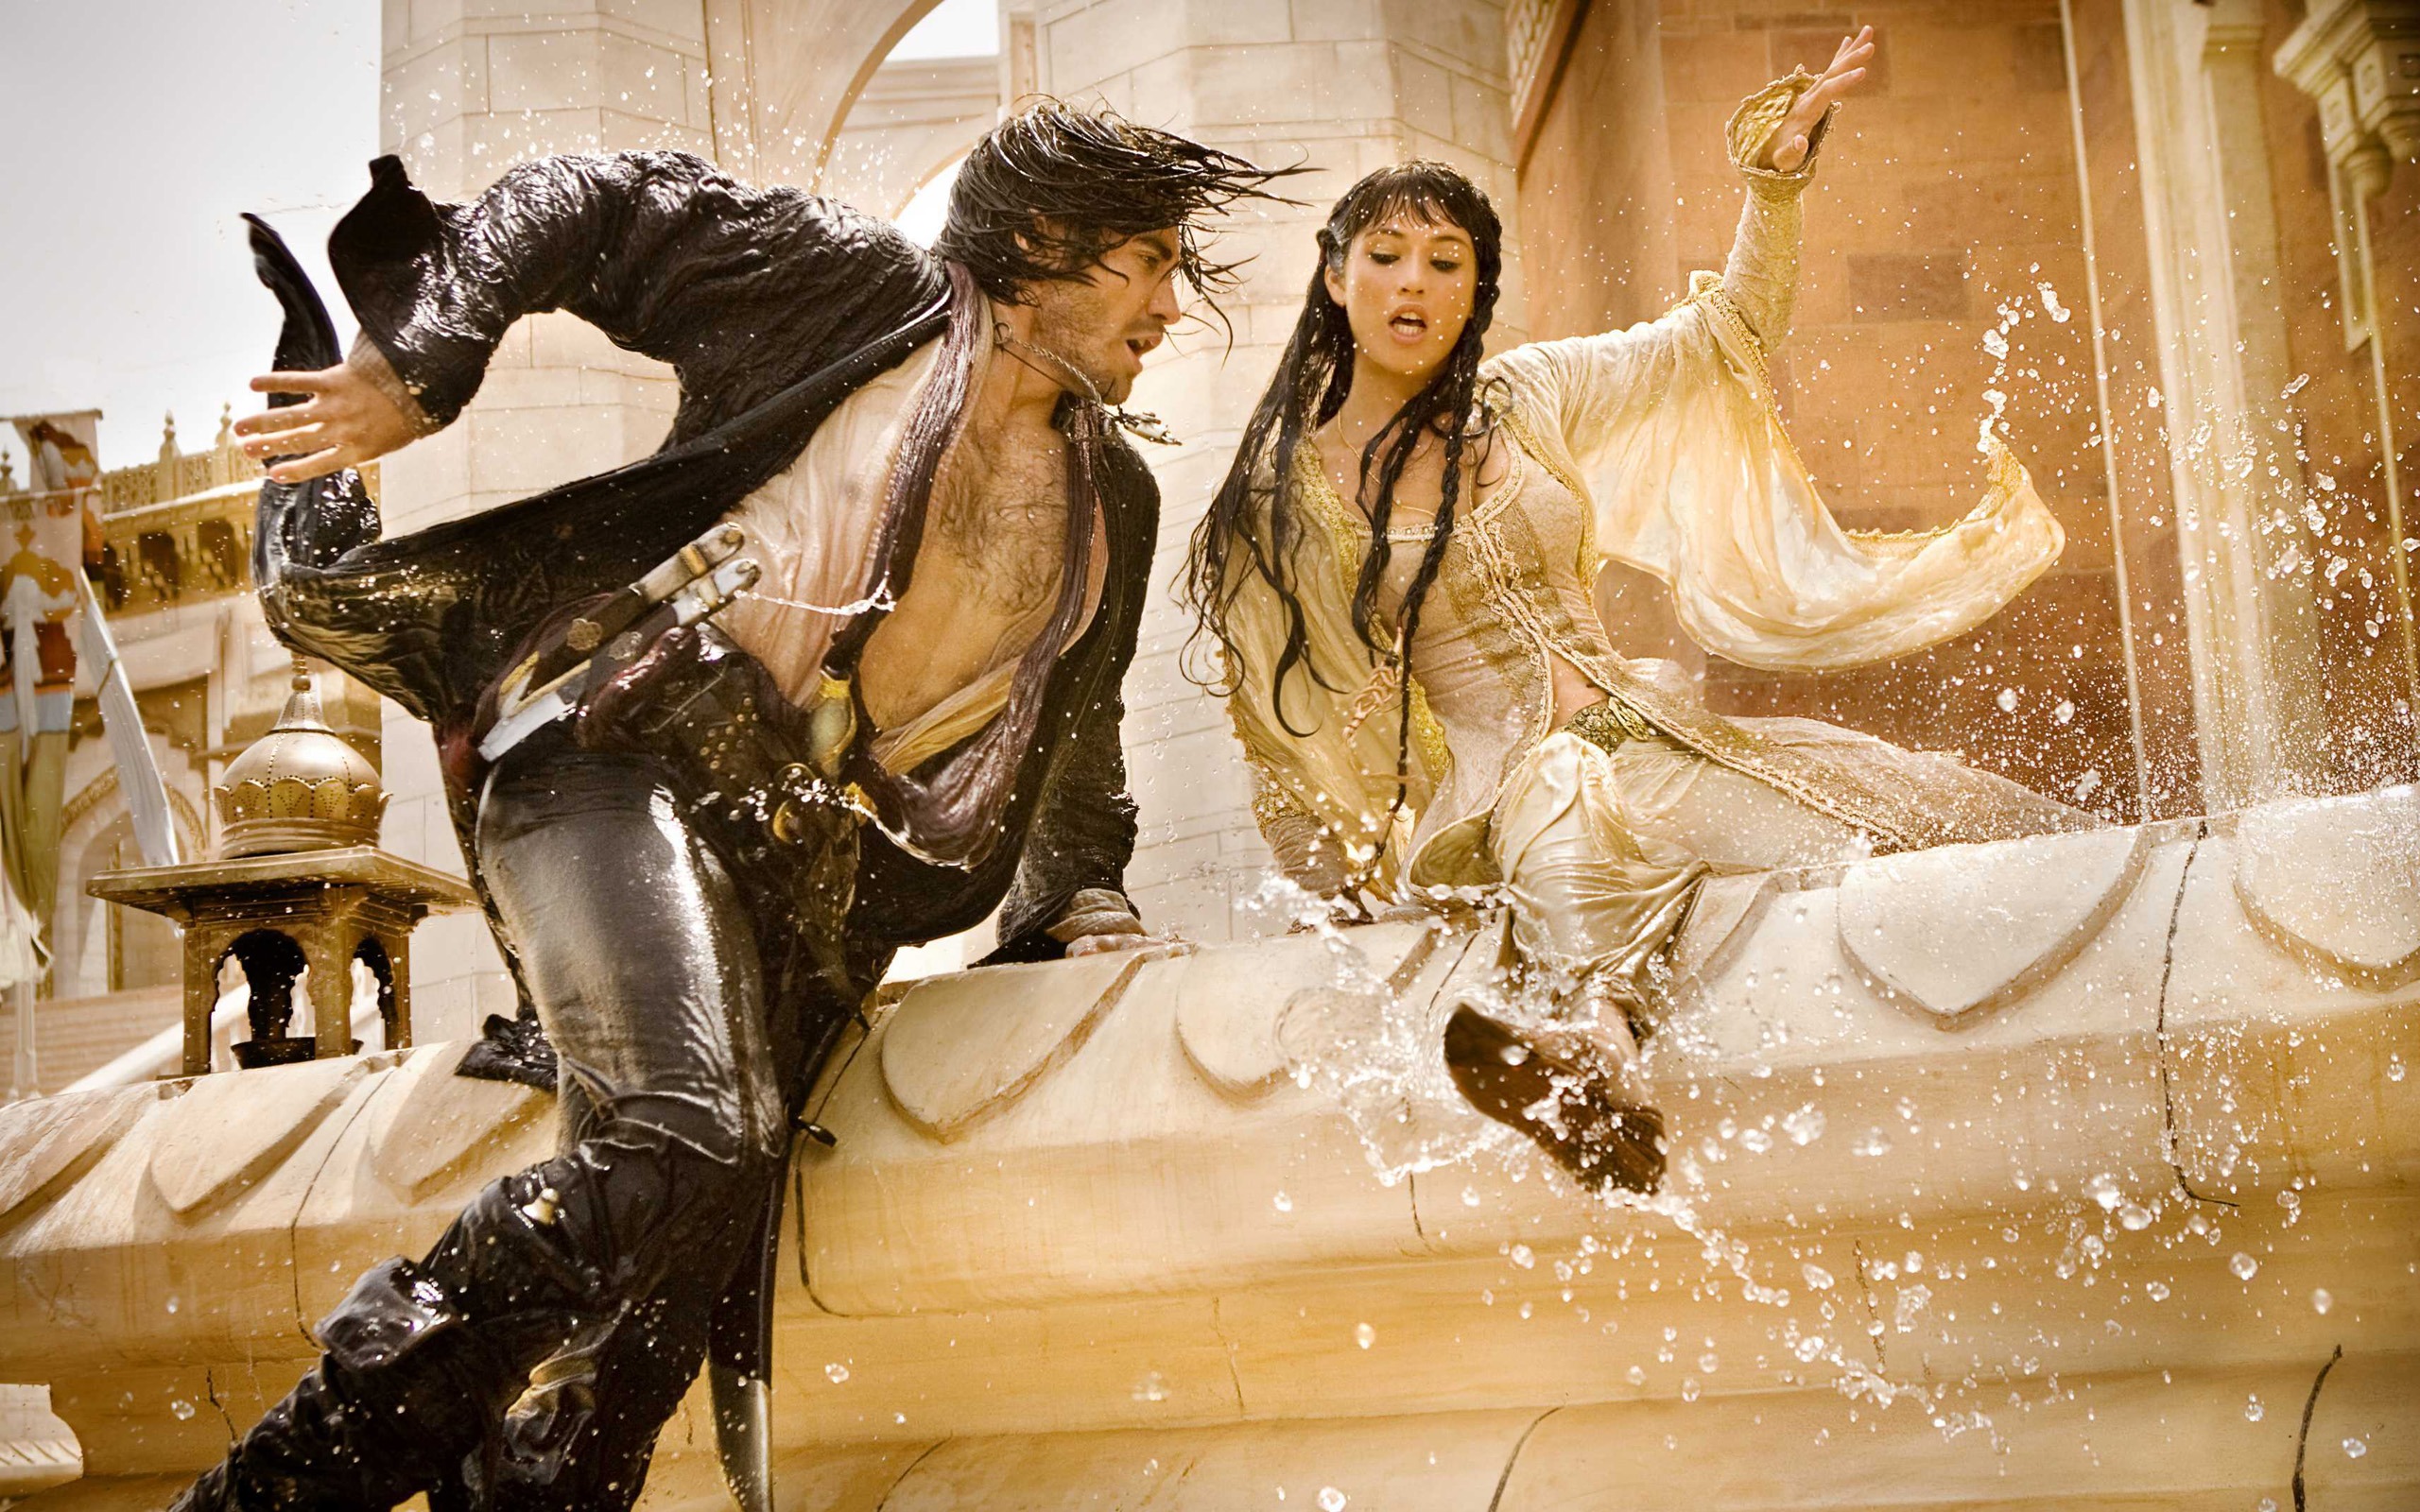 Prince of Persia The Sands of Time wallpaper #4 - 2560x1600